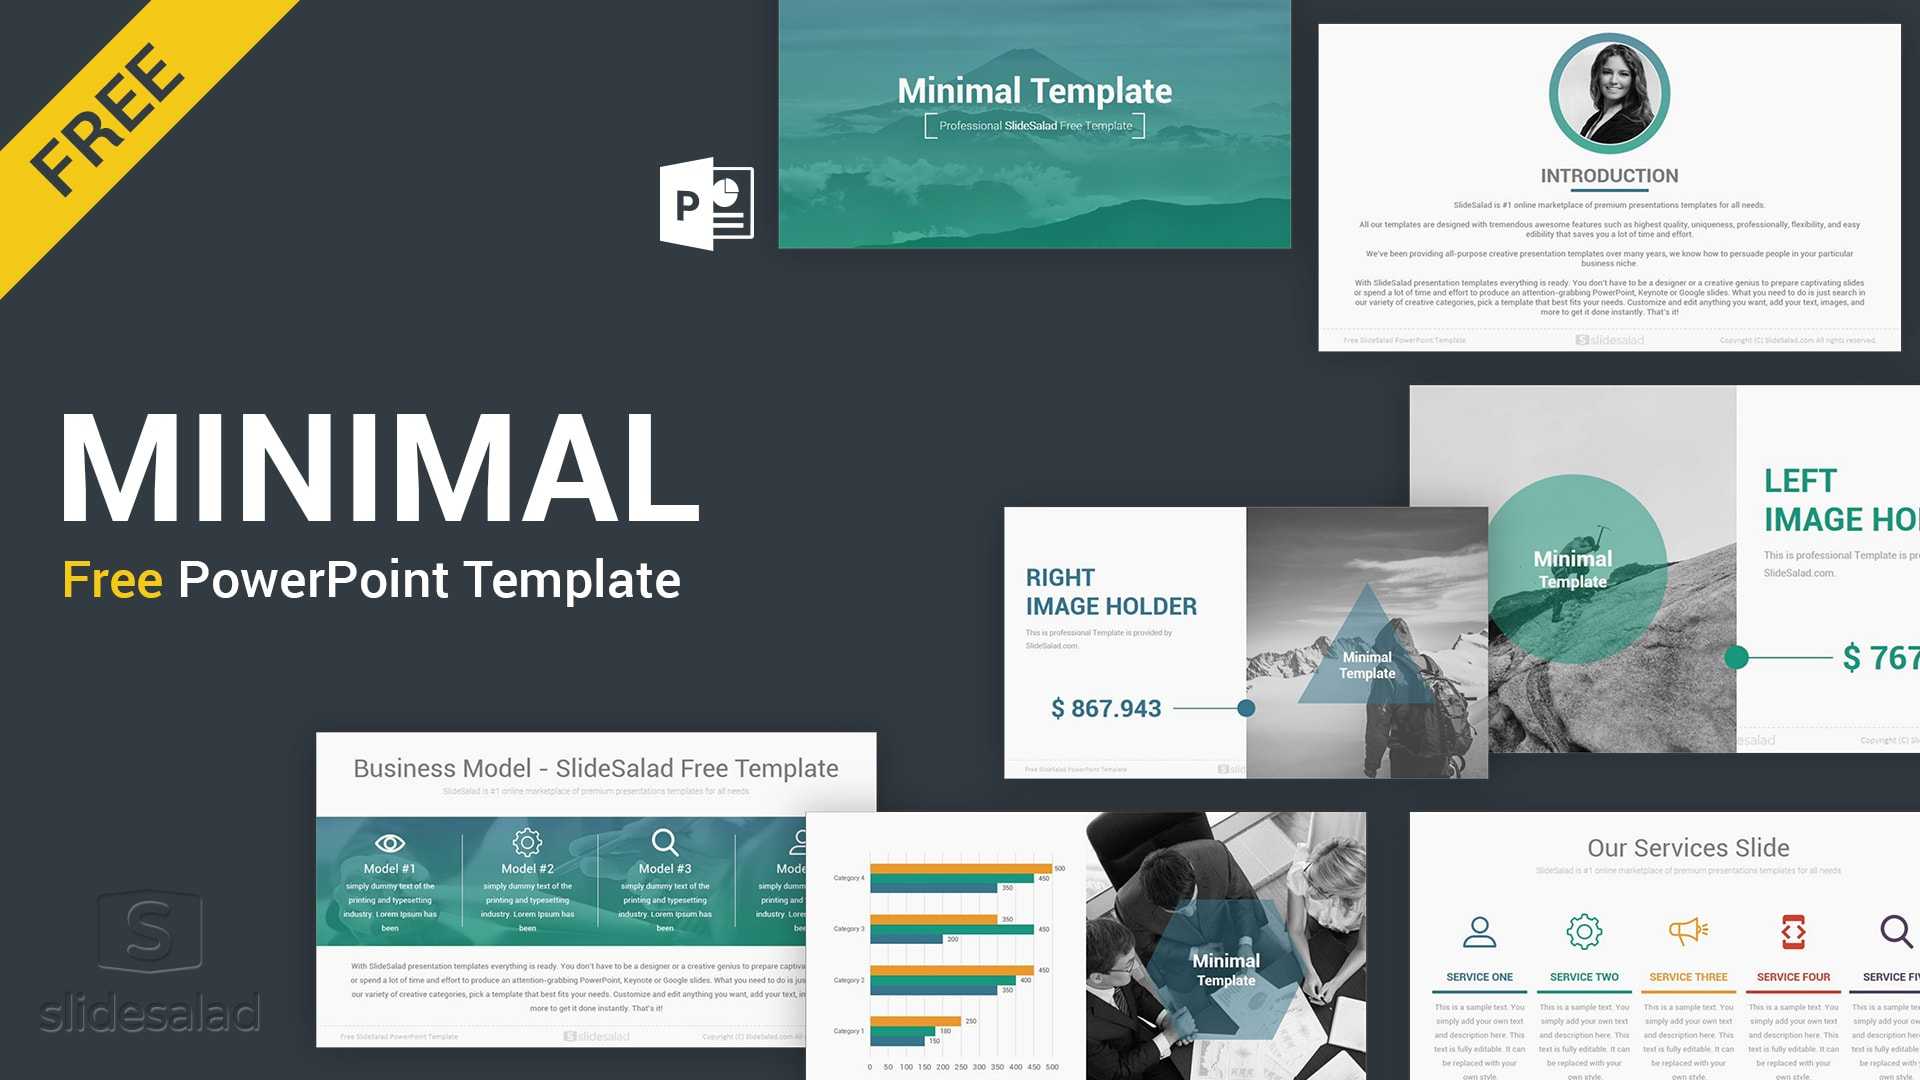 Best Free Presentation Templates Professional Designs 2019 In Powerpoint Slides Design Templates For Free